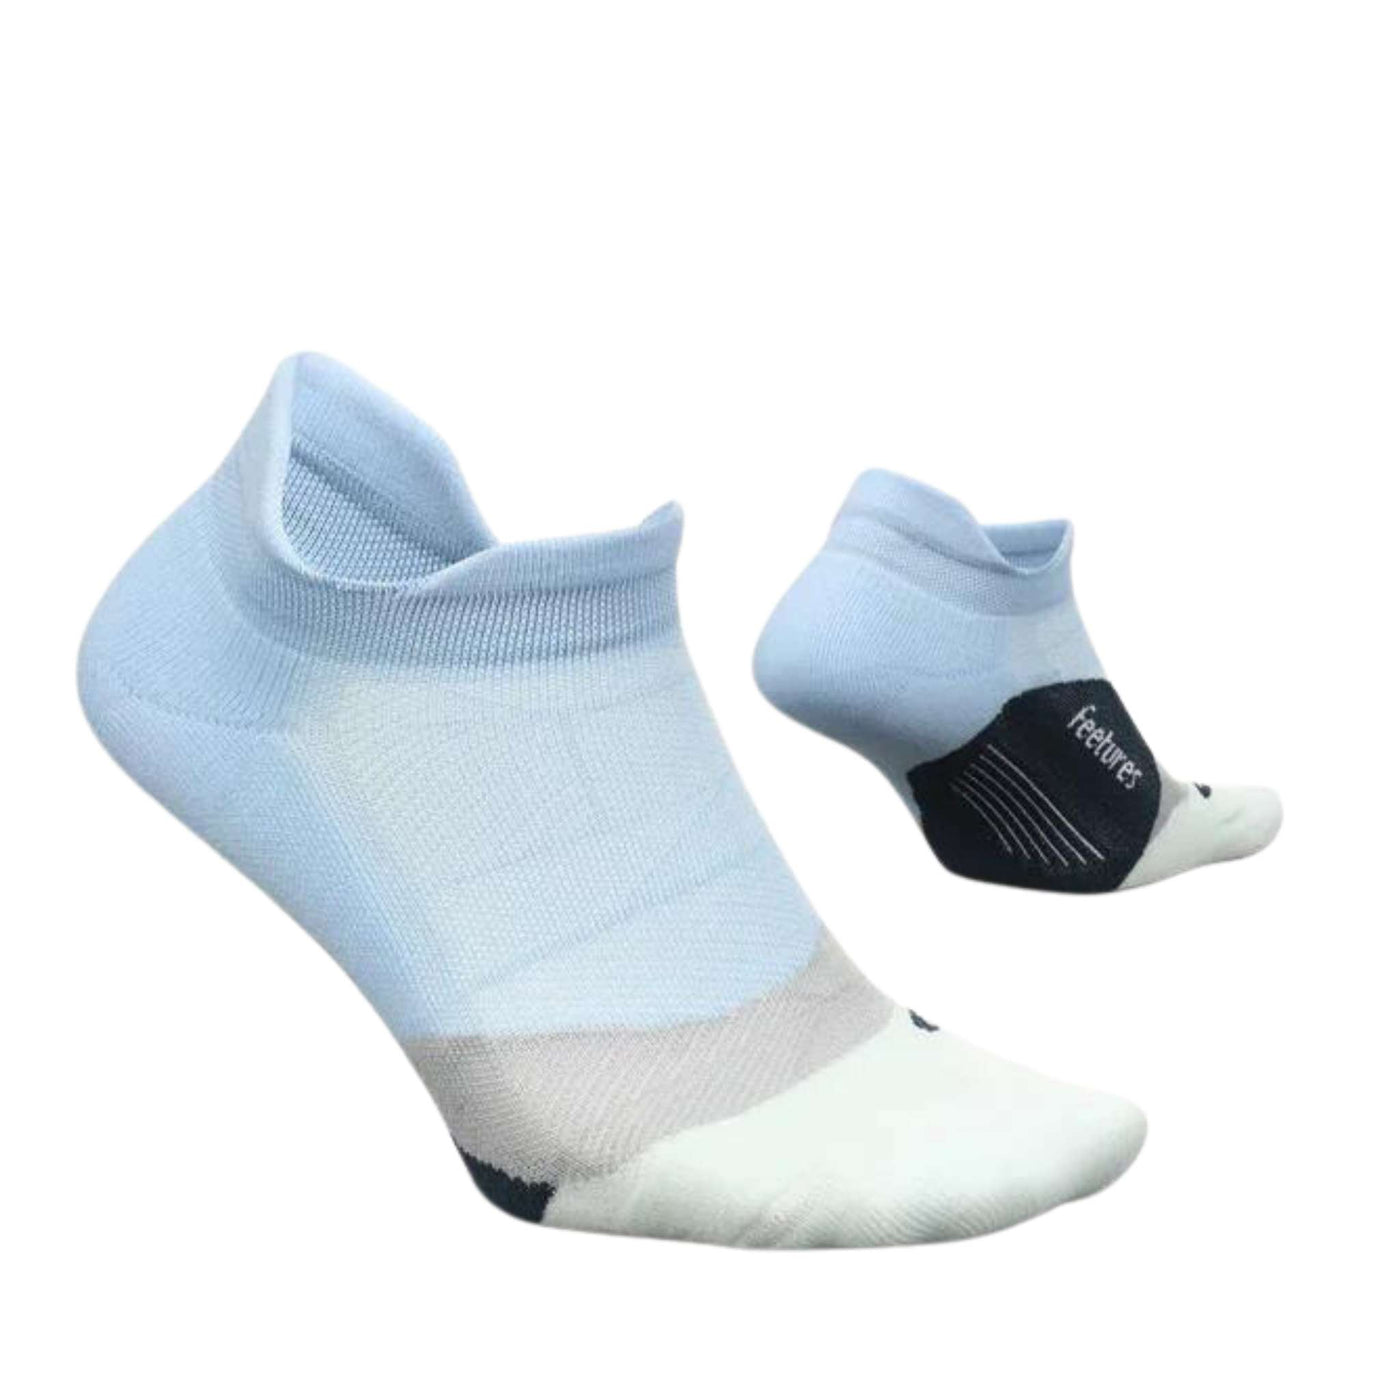 Feetures Elite Light Cushion No Show Tab | Performance & Active Socks | Further Faster Christchurch NZ #sea-ice